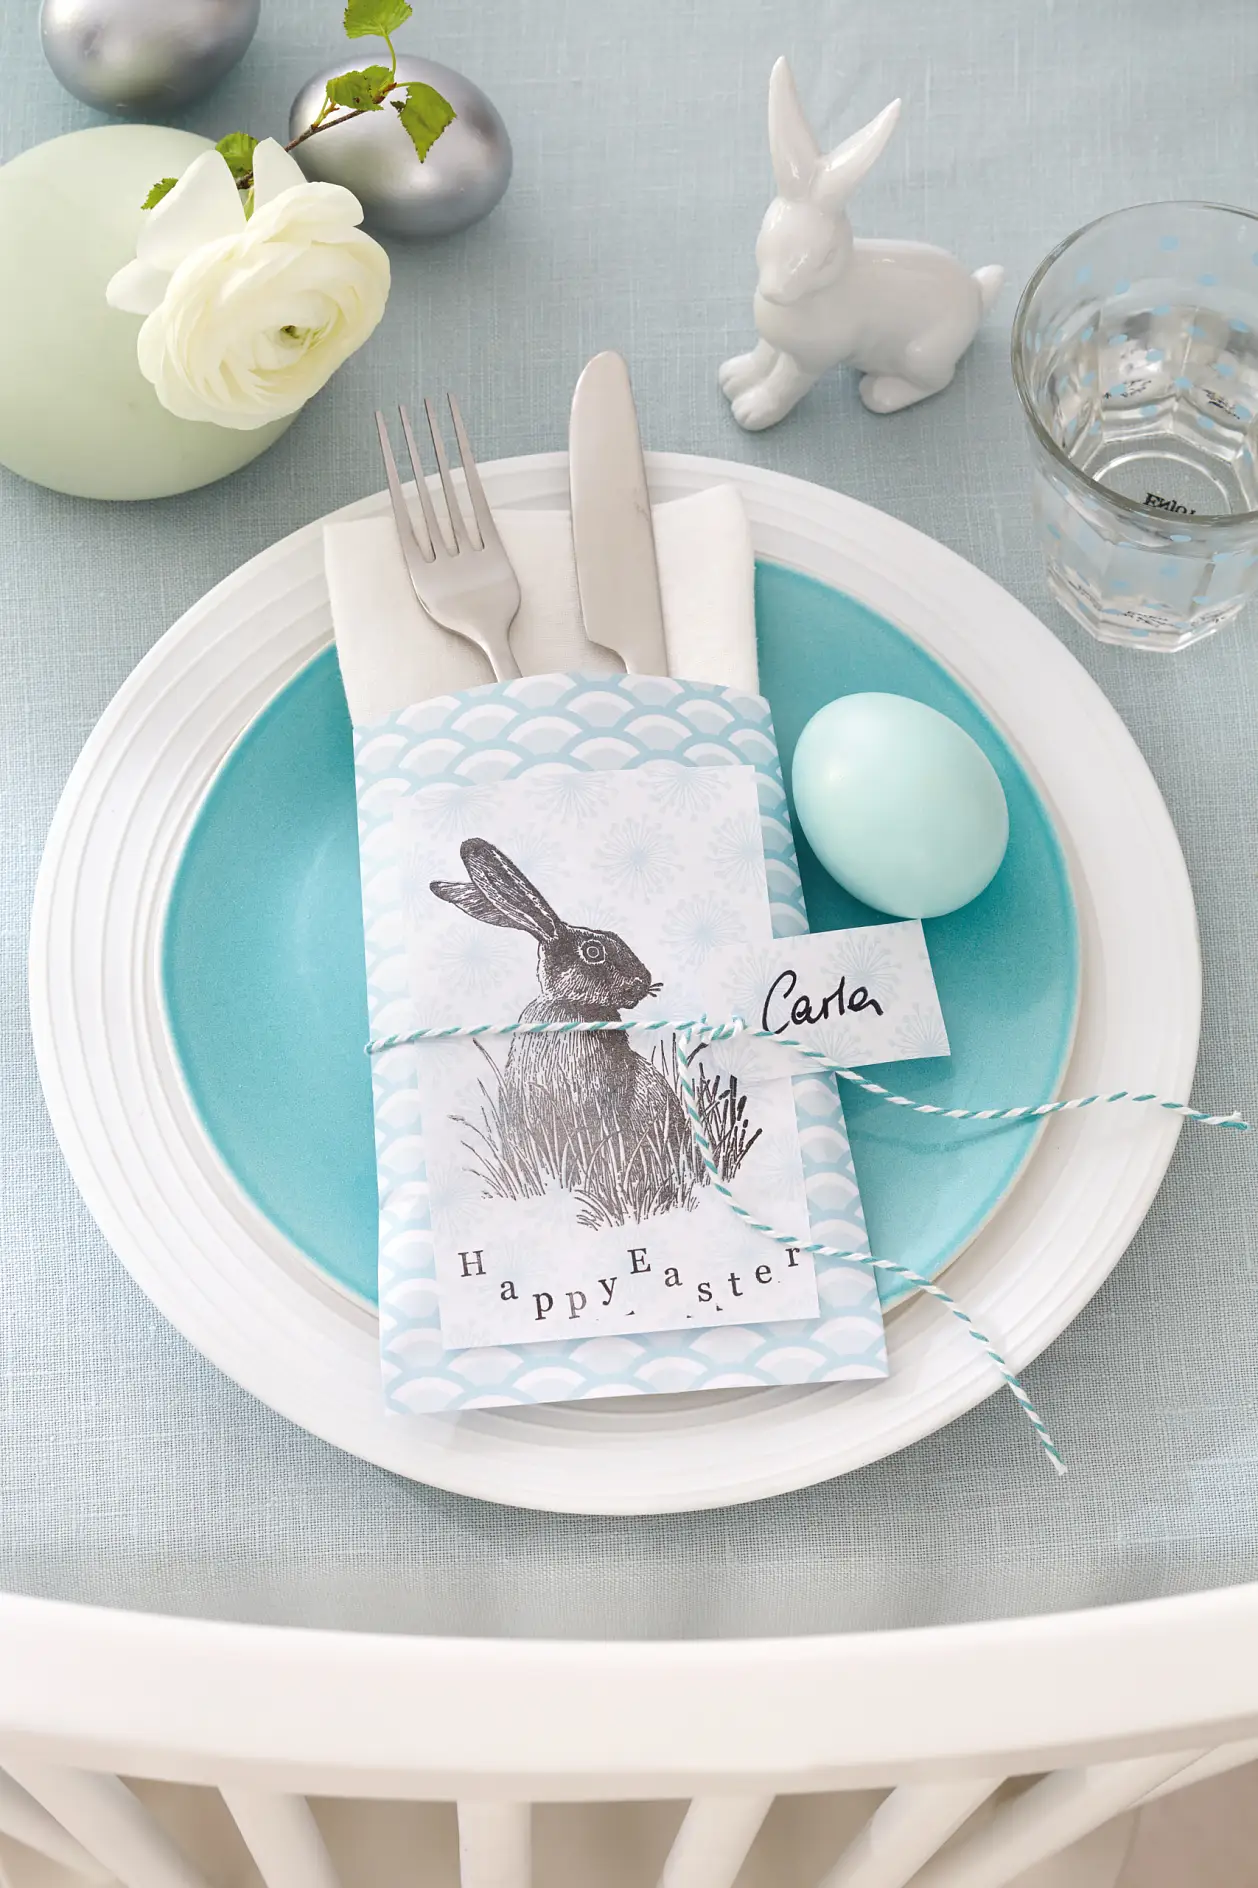 With plenty of charm, they - literally - pocket everything: These place cards also hold silverware and napkins. The pouch is folded and glued; the bunny is printed with a stamp.